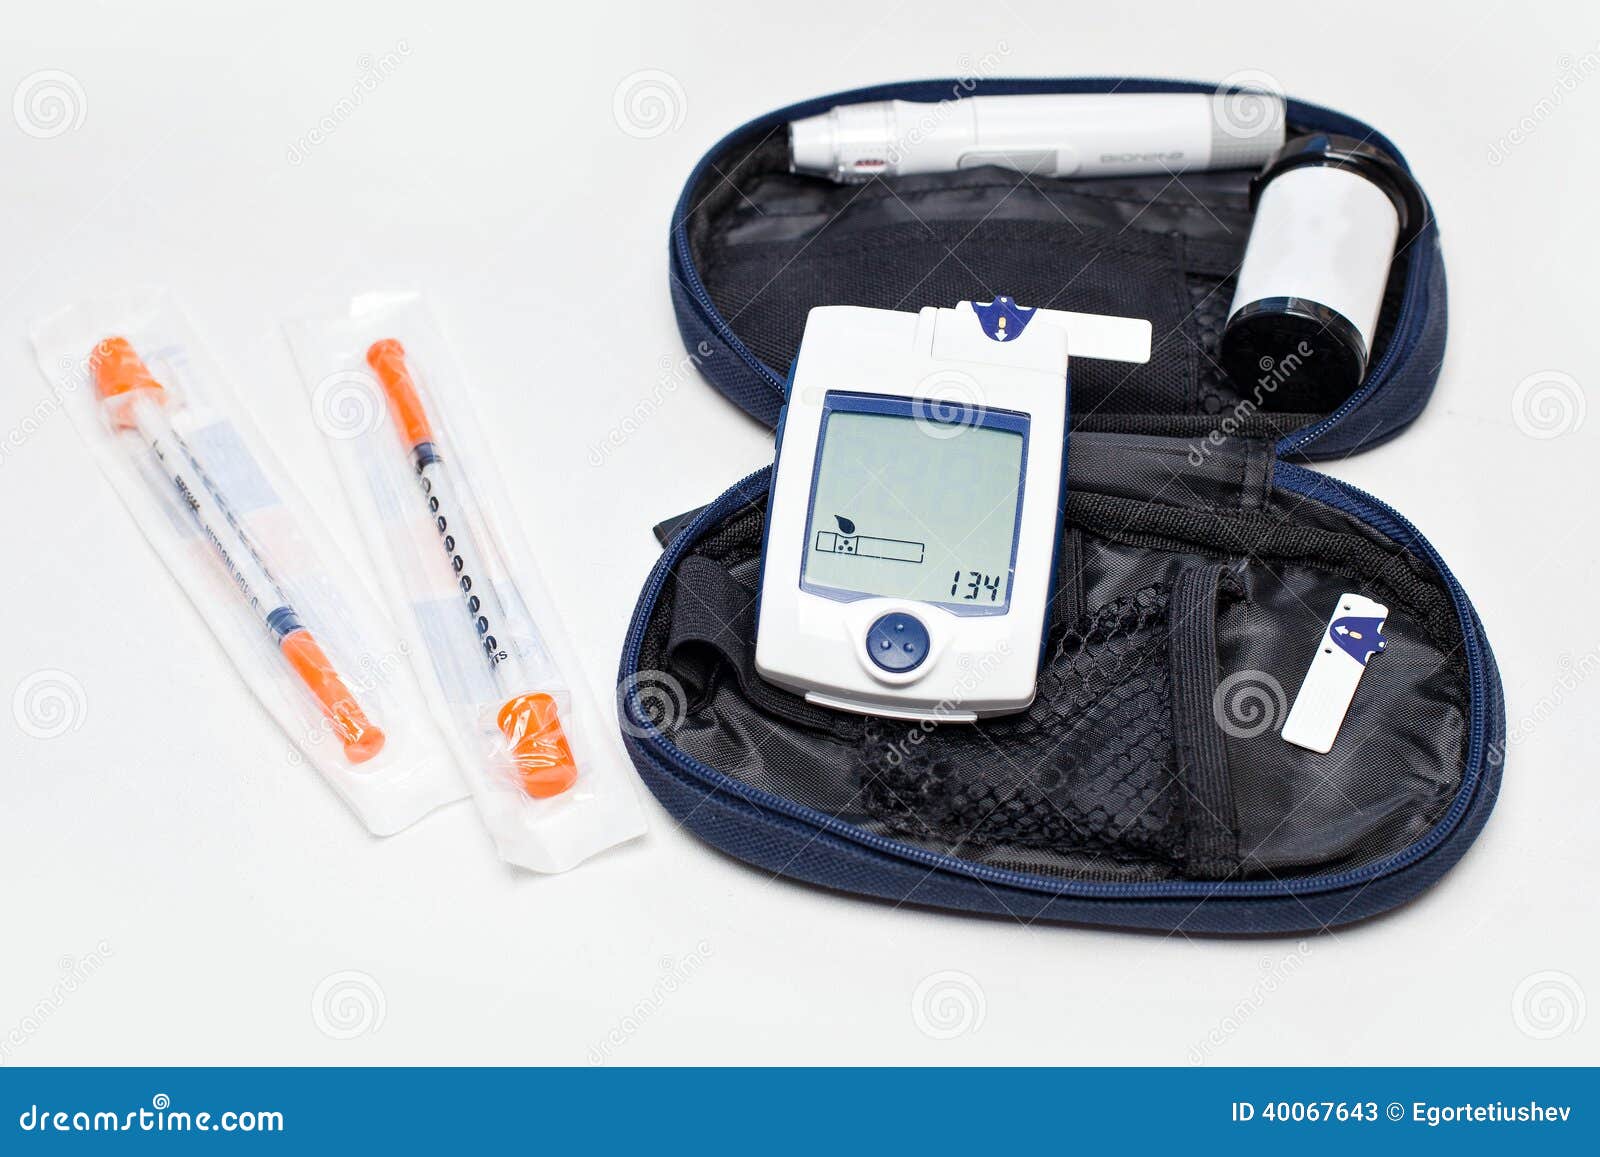 blood glucose monitoring meter for diabetes, glucometer